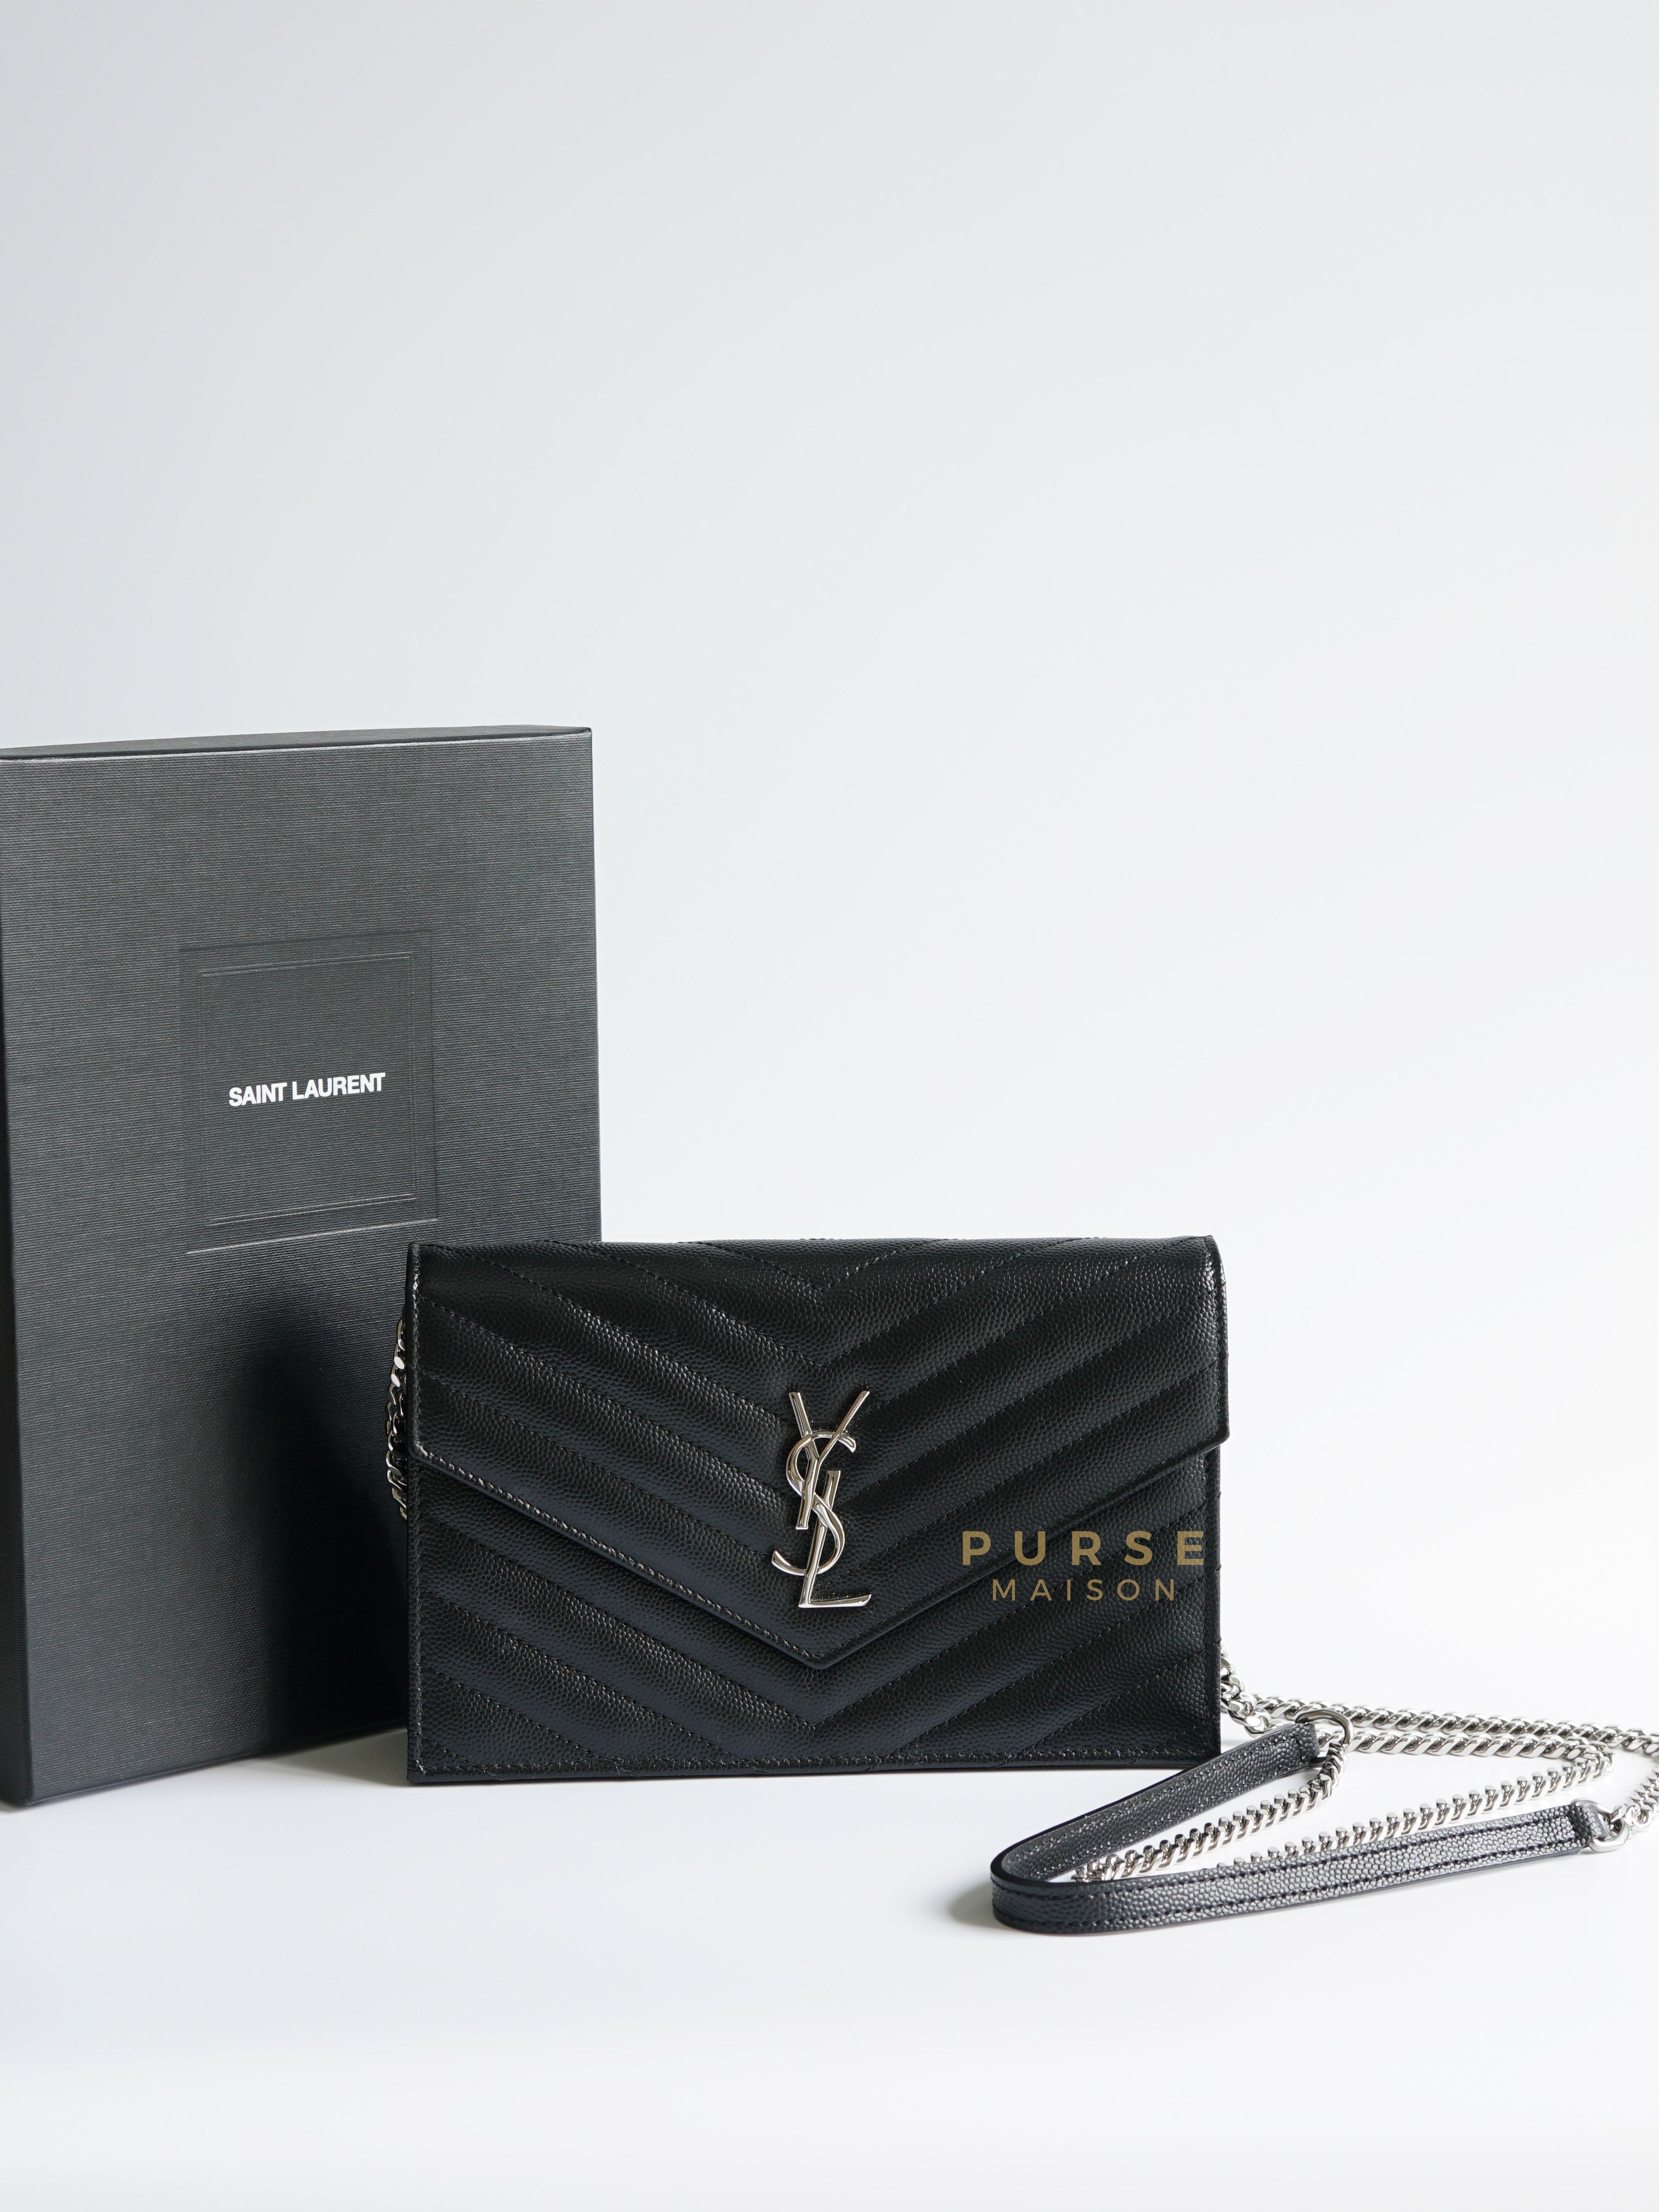 Wallet on Chain Small in Monogram Grain Black Leather and Silver Hardware | Purse Maison Luxury Bags Shop